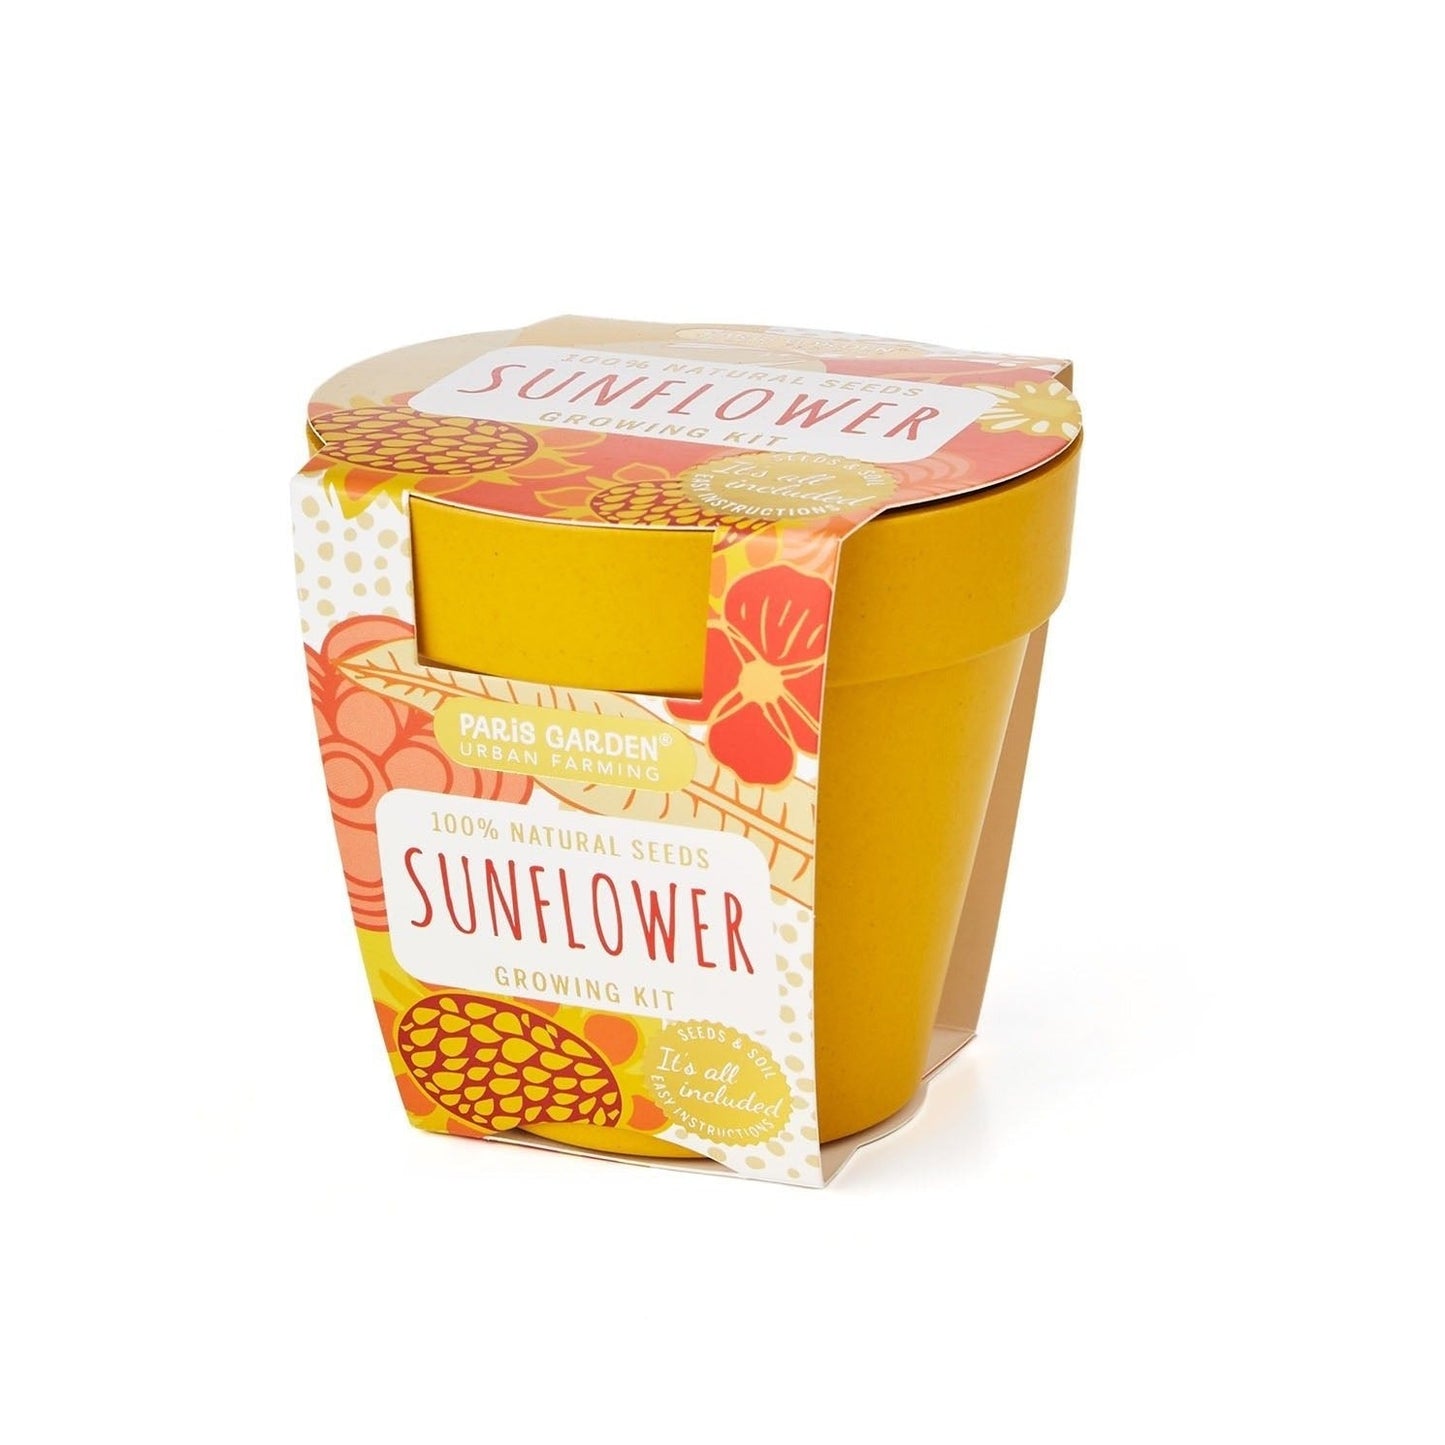 Grow your own SunFlower Kit by boutique garden - BetterThanFlowers